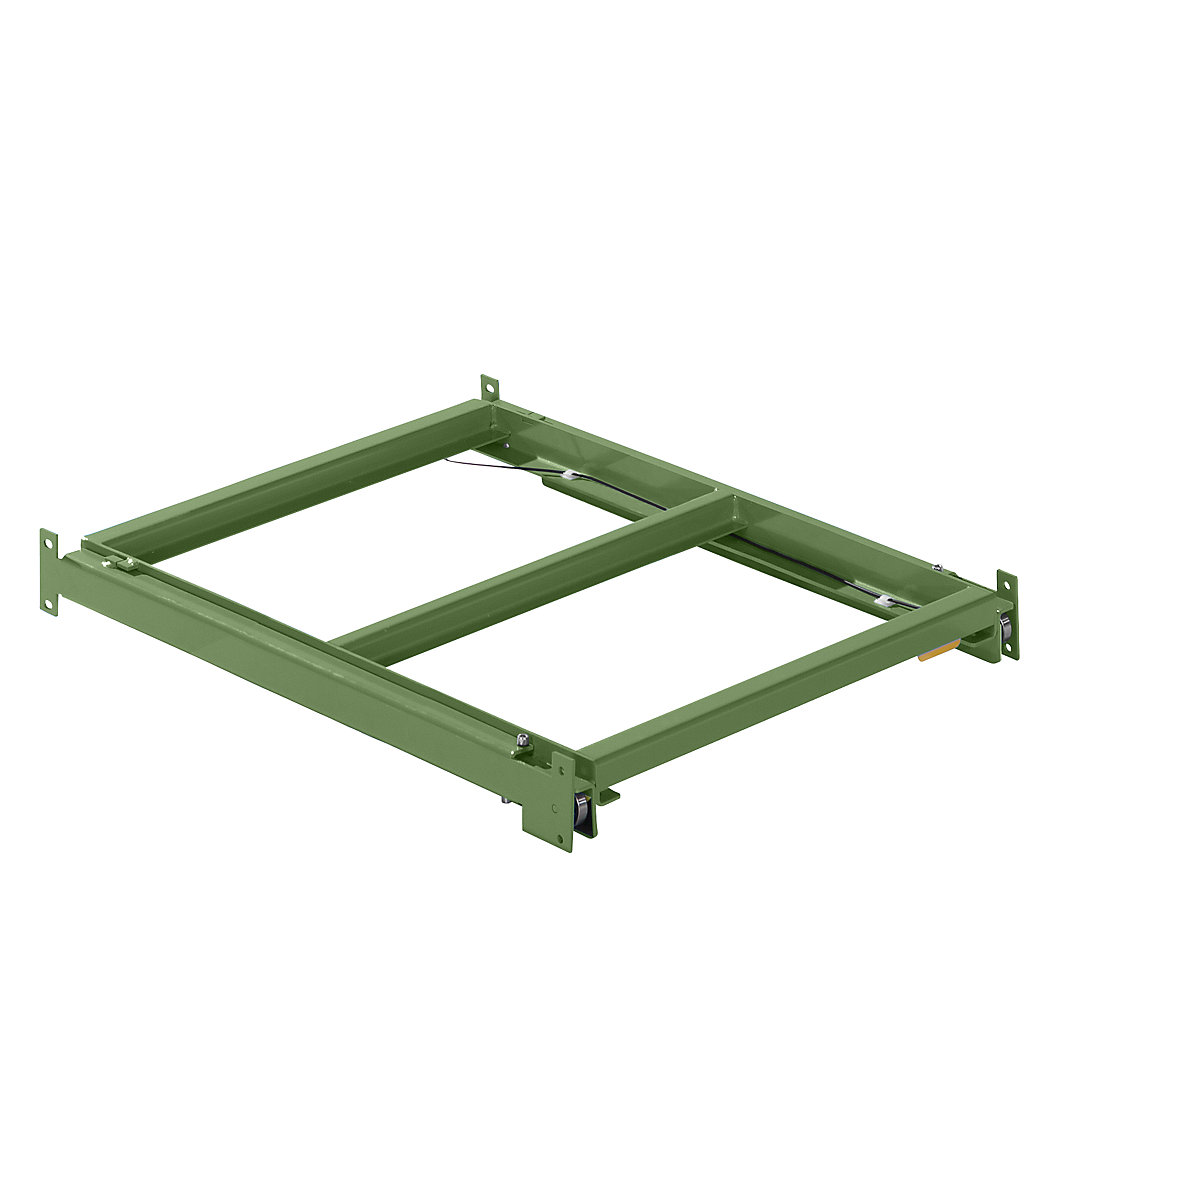 Extension frame – LISTA, WxD 890 x 1260 mm, max. shelf load 800 kg, 65 % extendable, reseda green-5